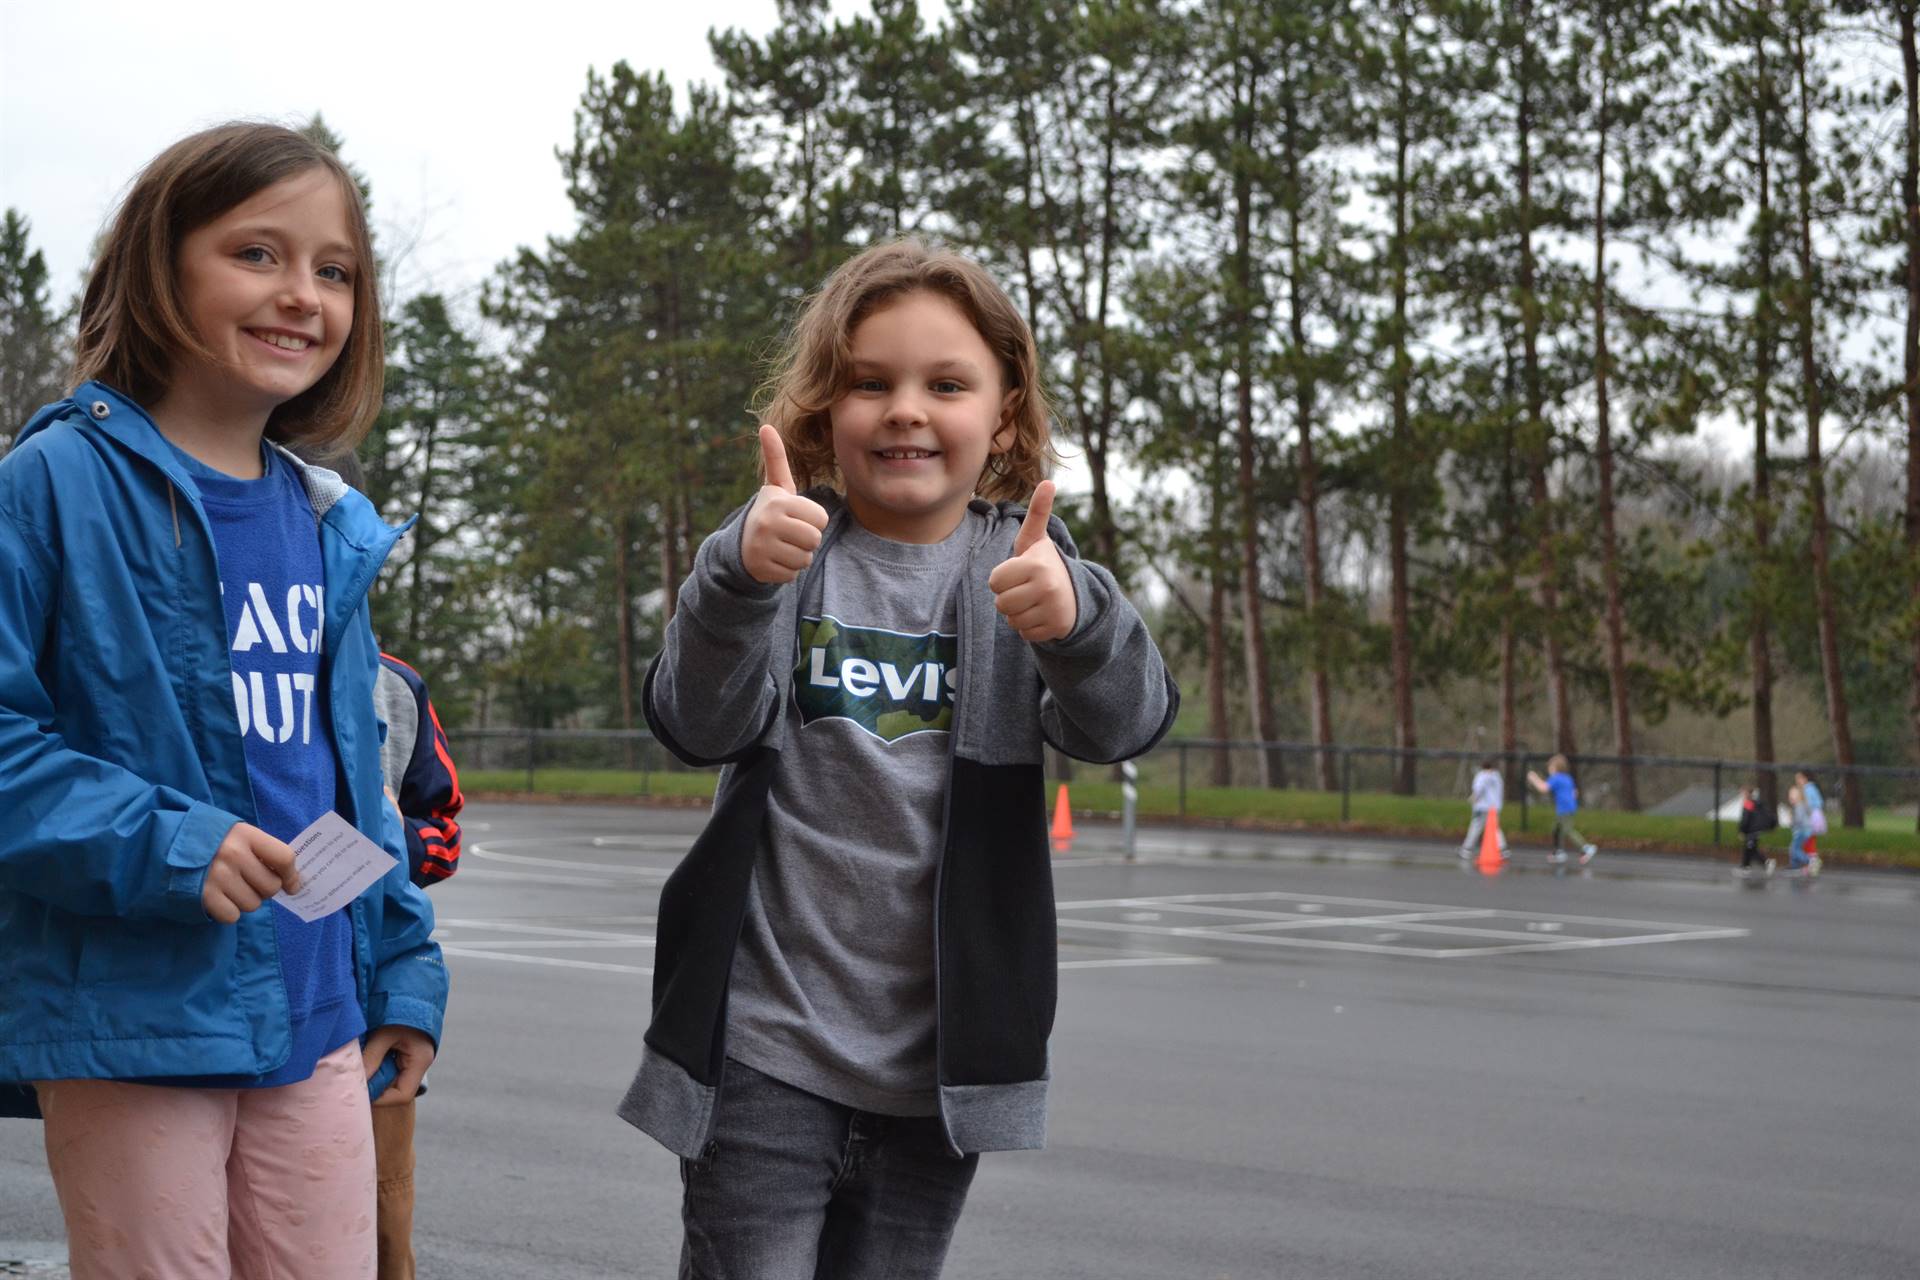 Marzolf student gives 2 thumbs up during the Walk for Kindness